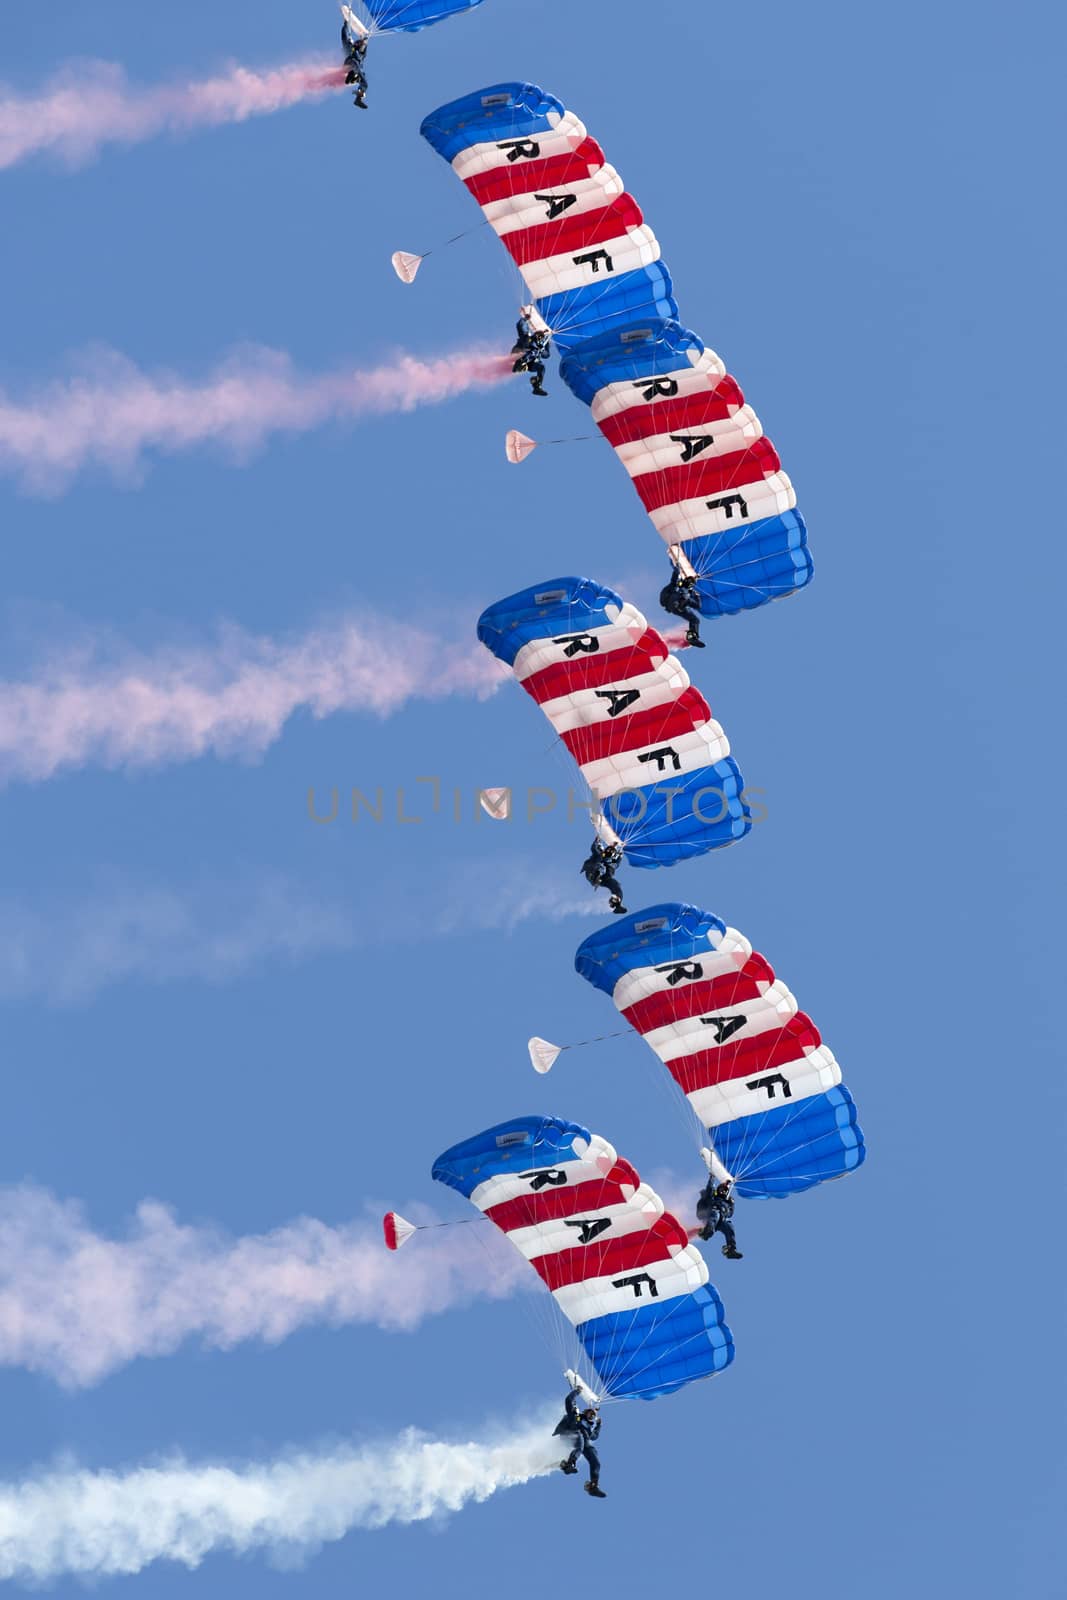 The Royal Air Force Falcons Parachute Display Team in action